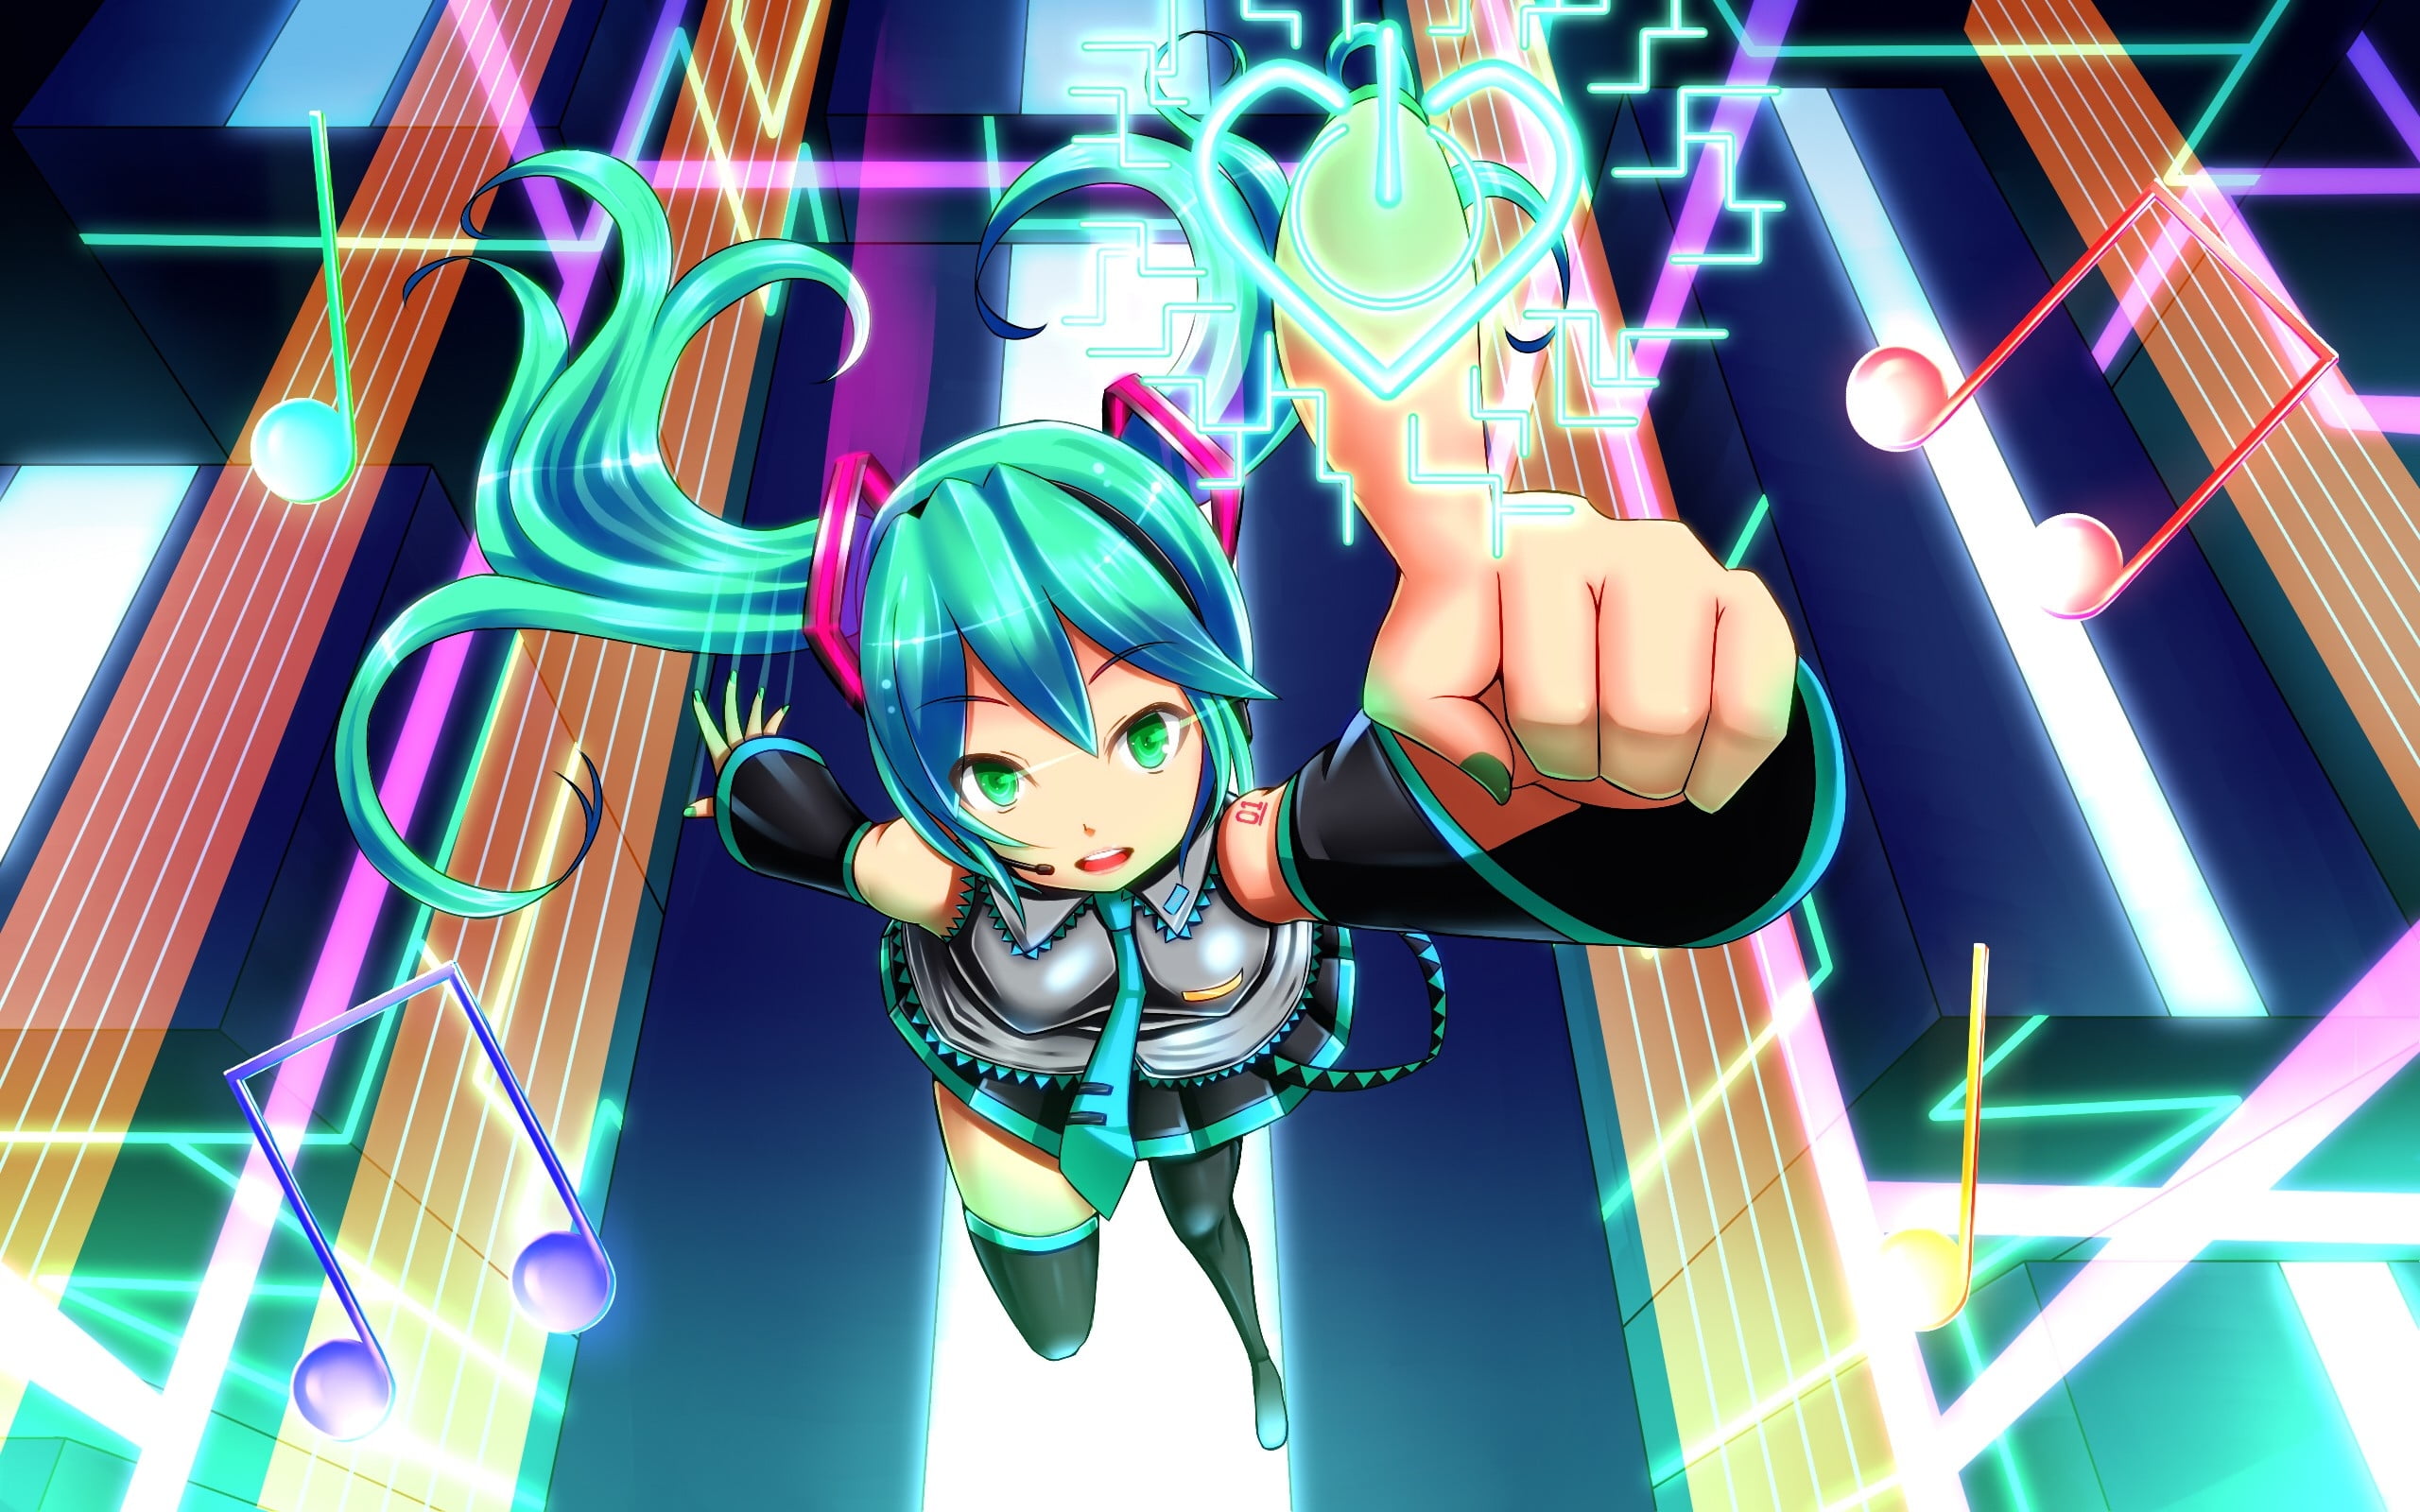 Online crop | teal haired anime character wearing black and teal suit